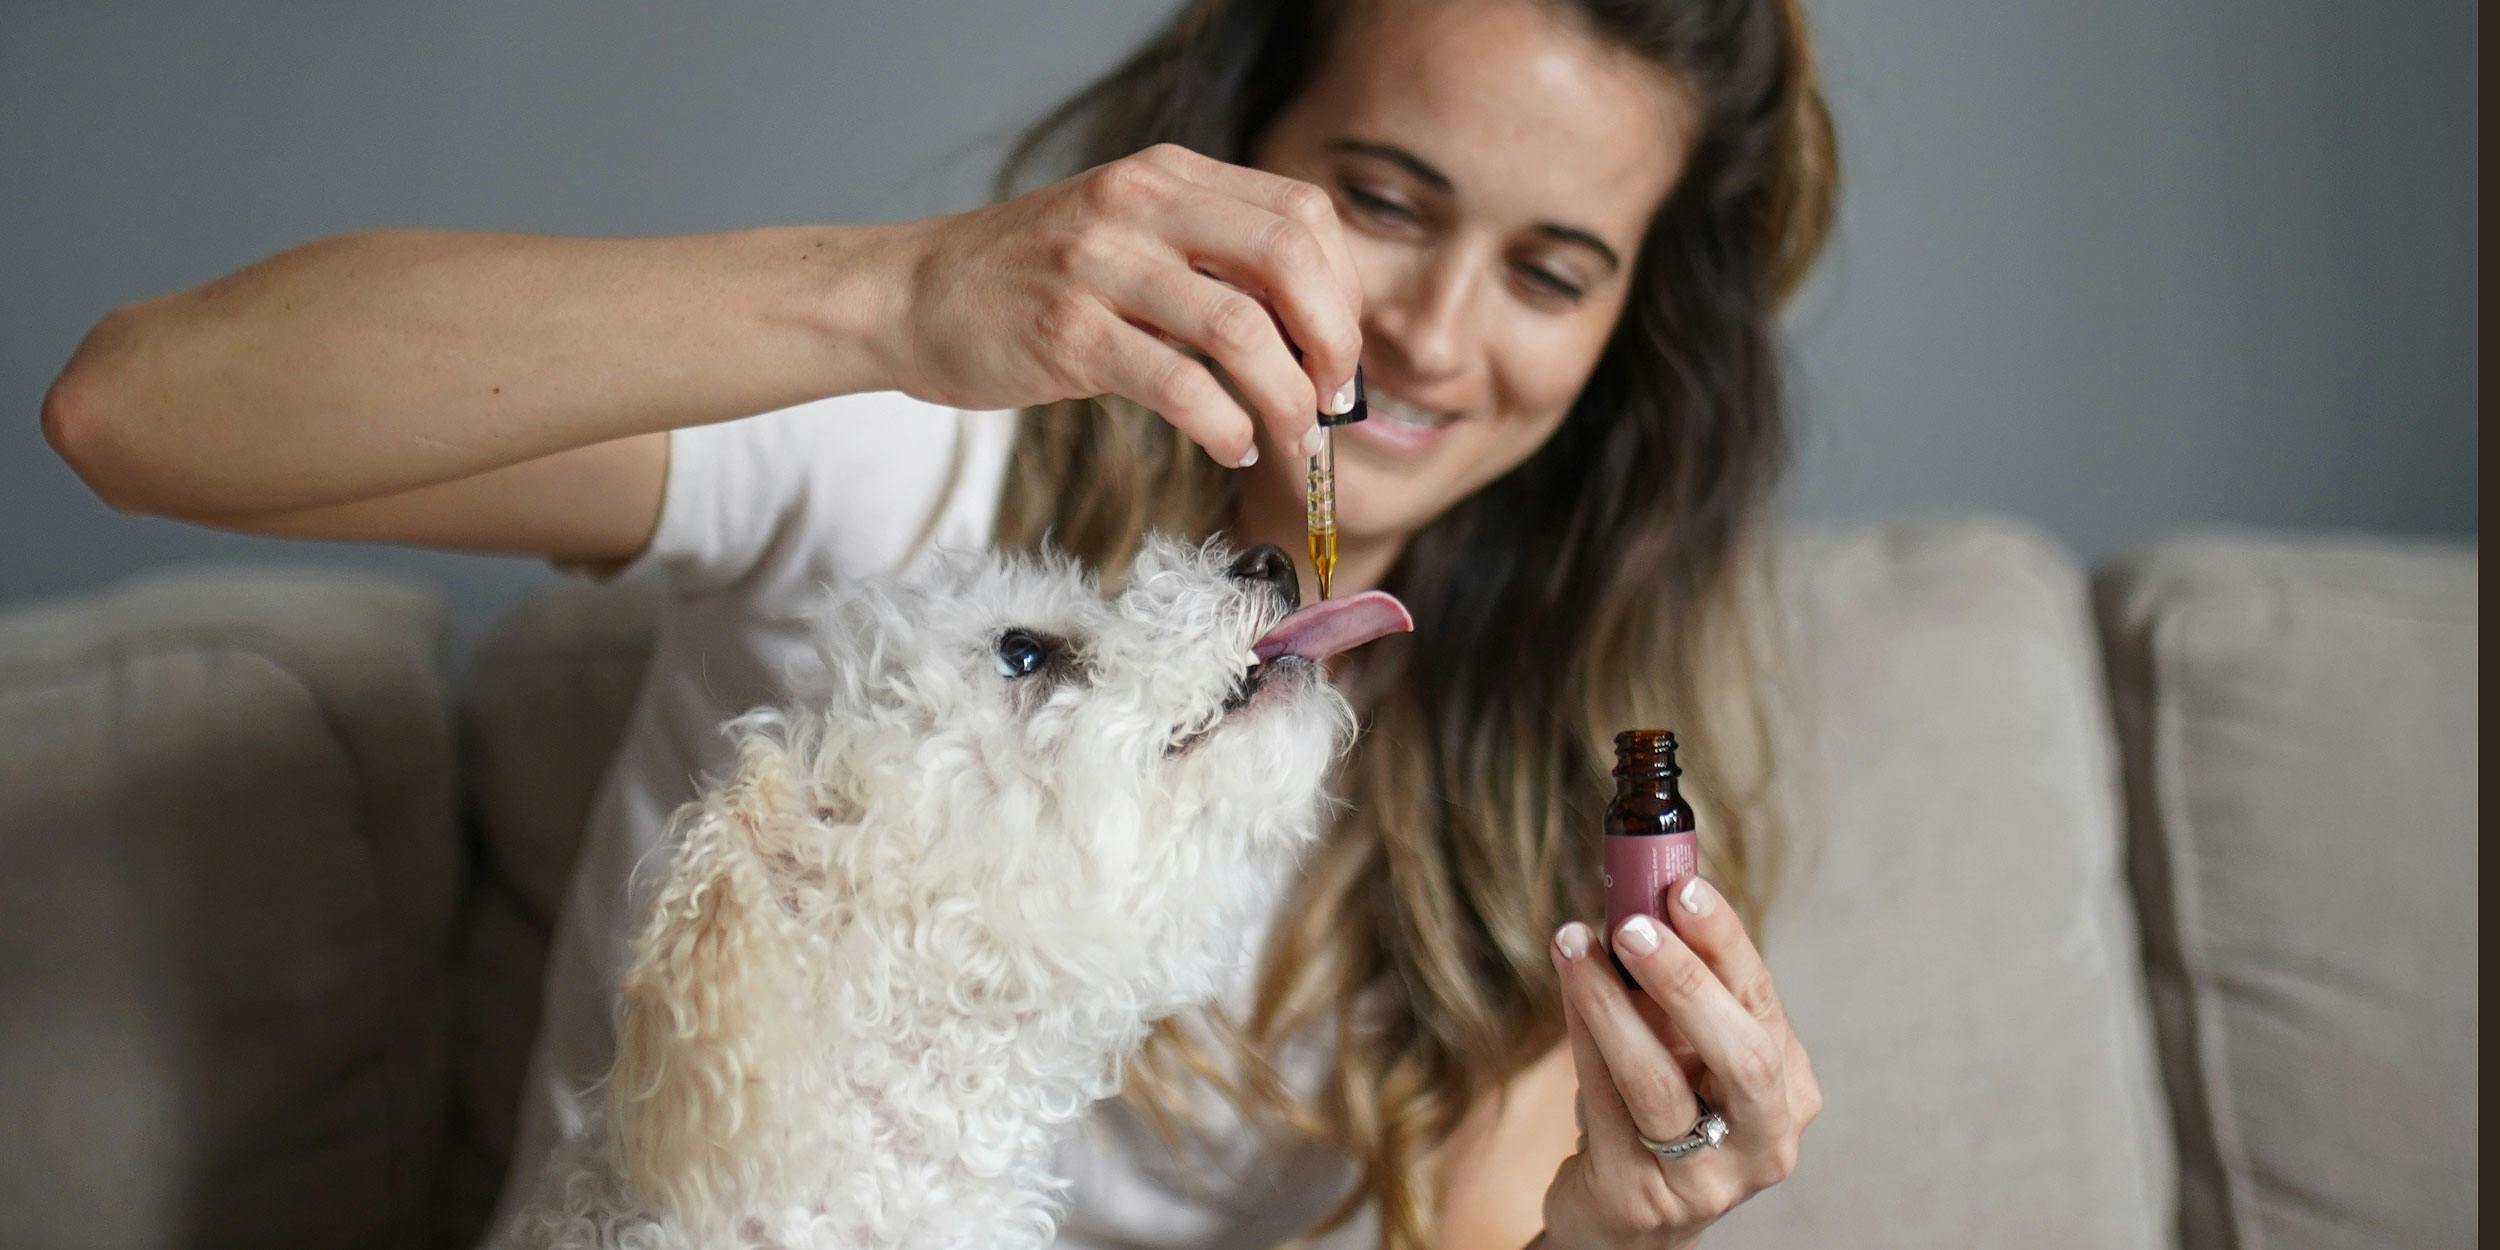 Alexis Rosenbaum administers CBD for dogs with arthritis to her poodle, Bo.